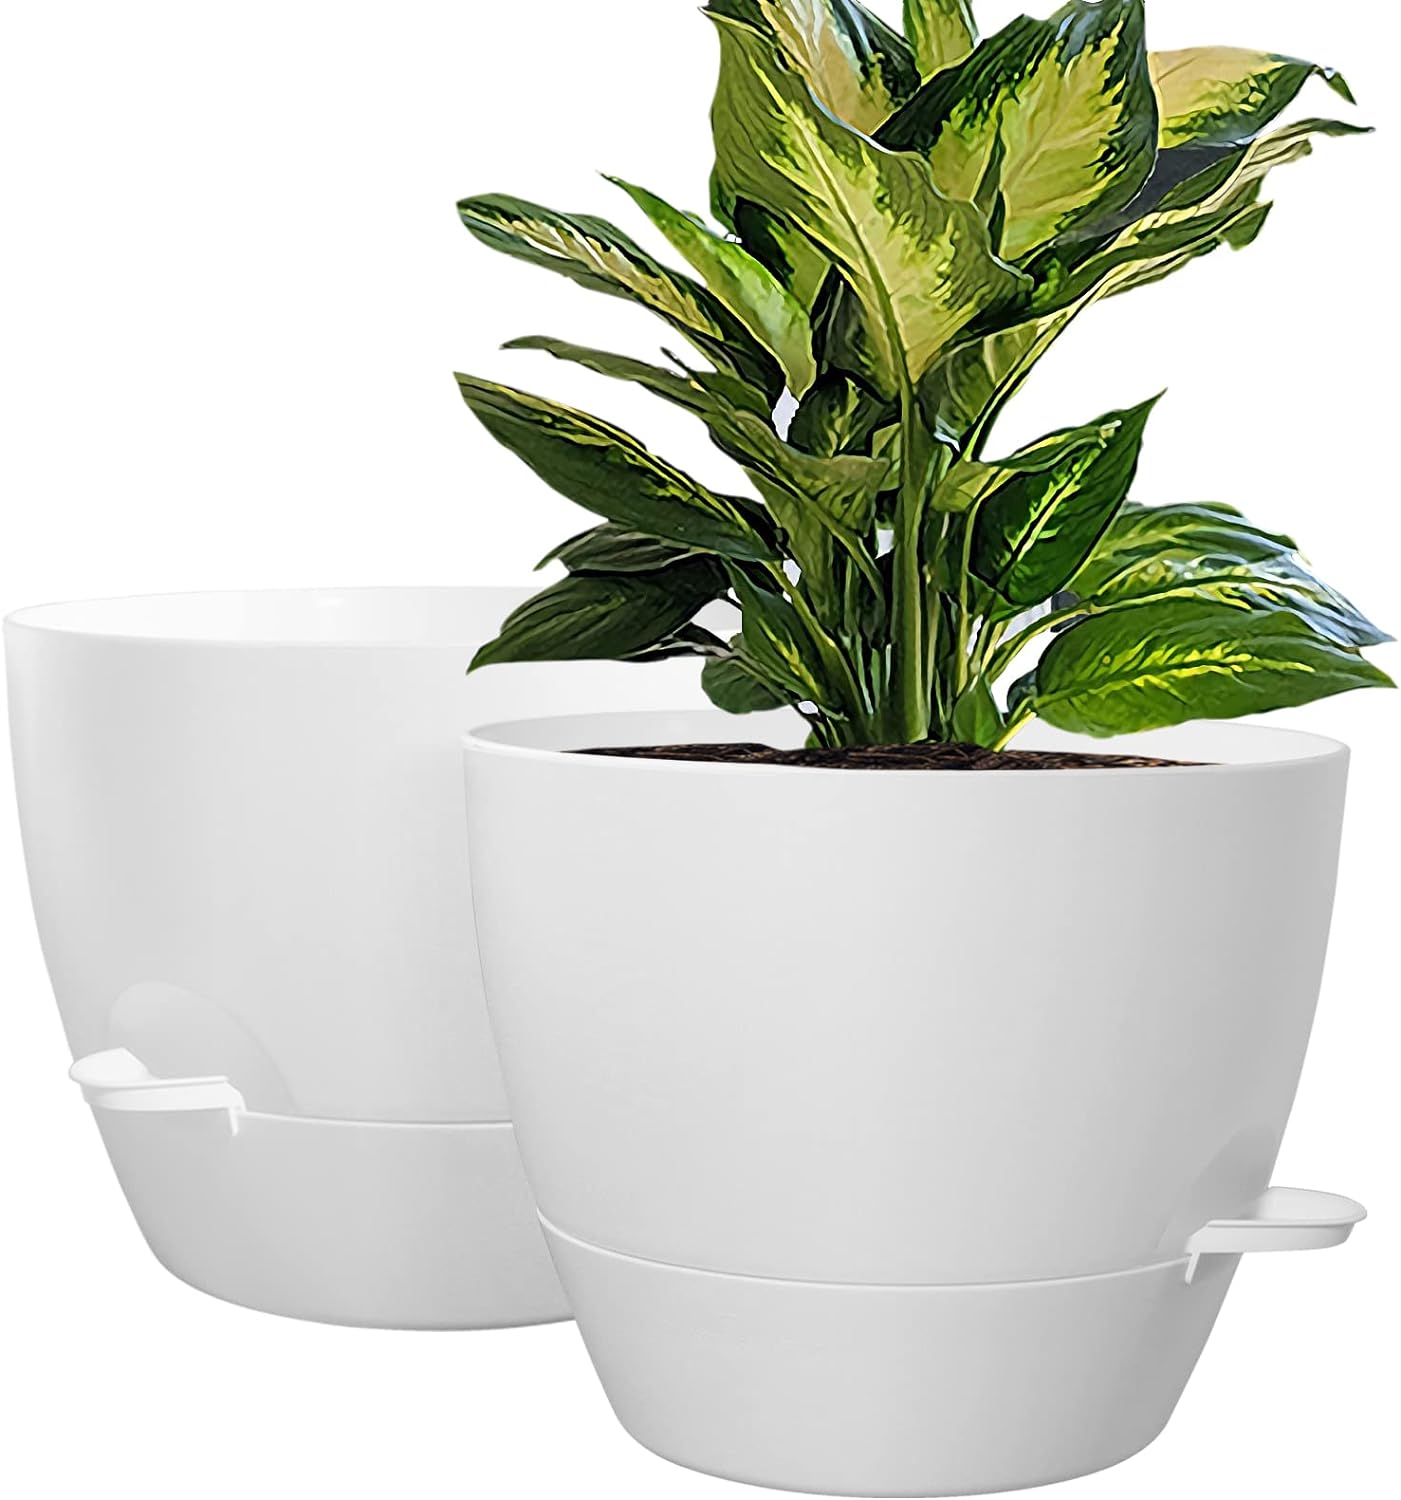 10 inch Self Watering Planters, 2 Pack Large Plastic Plant Pots with Deep Reservior and High Drainage Holes for Indoor Outdoor Plants and Flowers, White